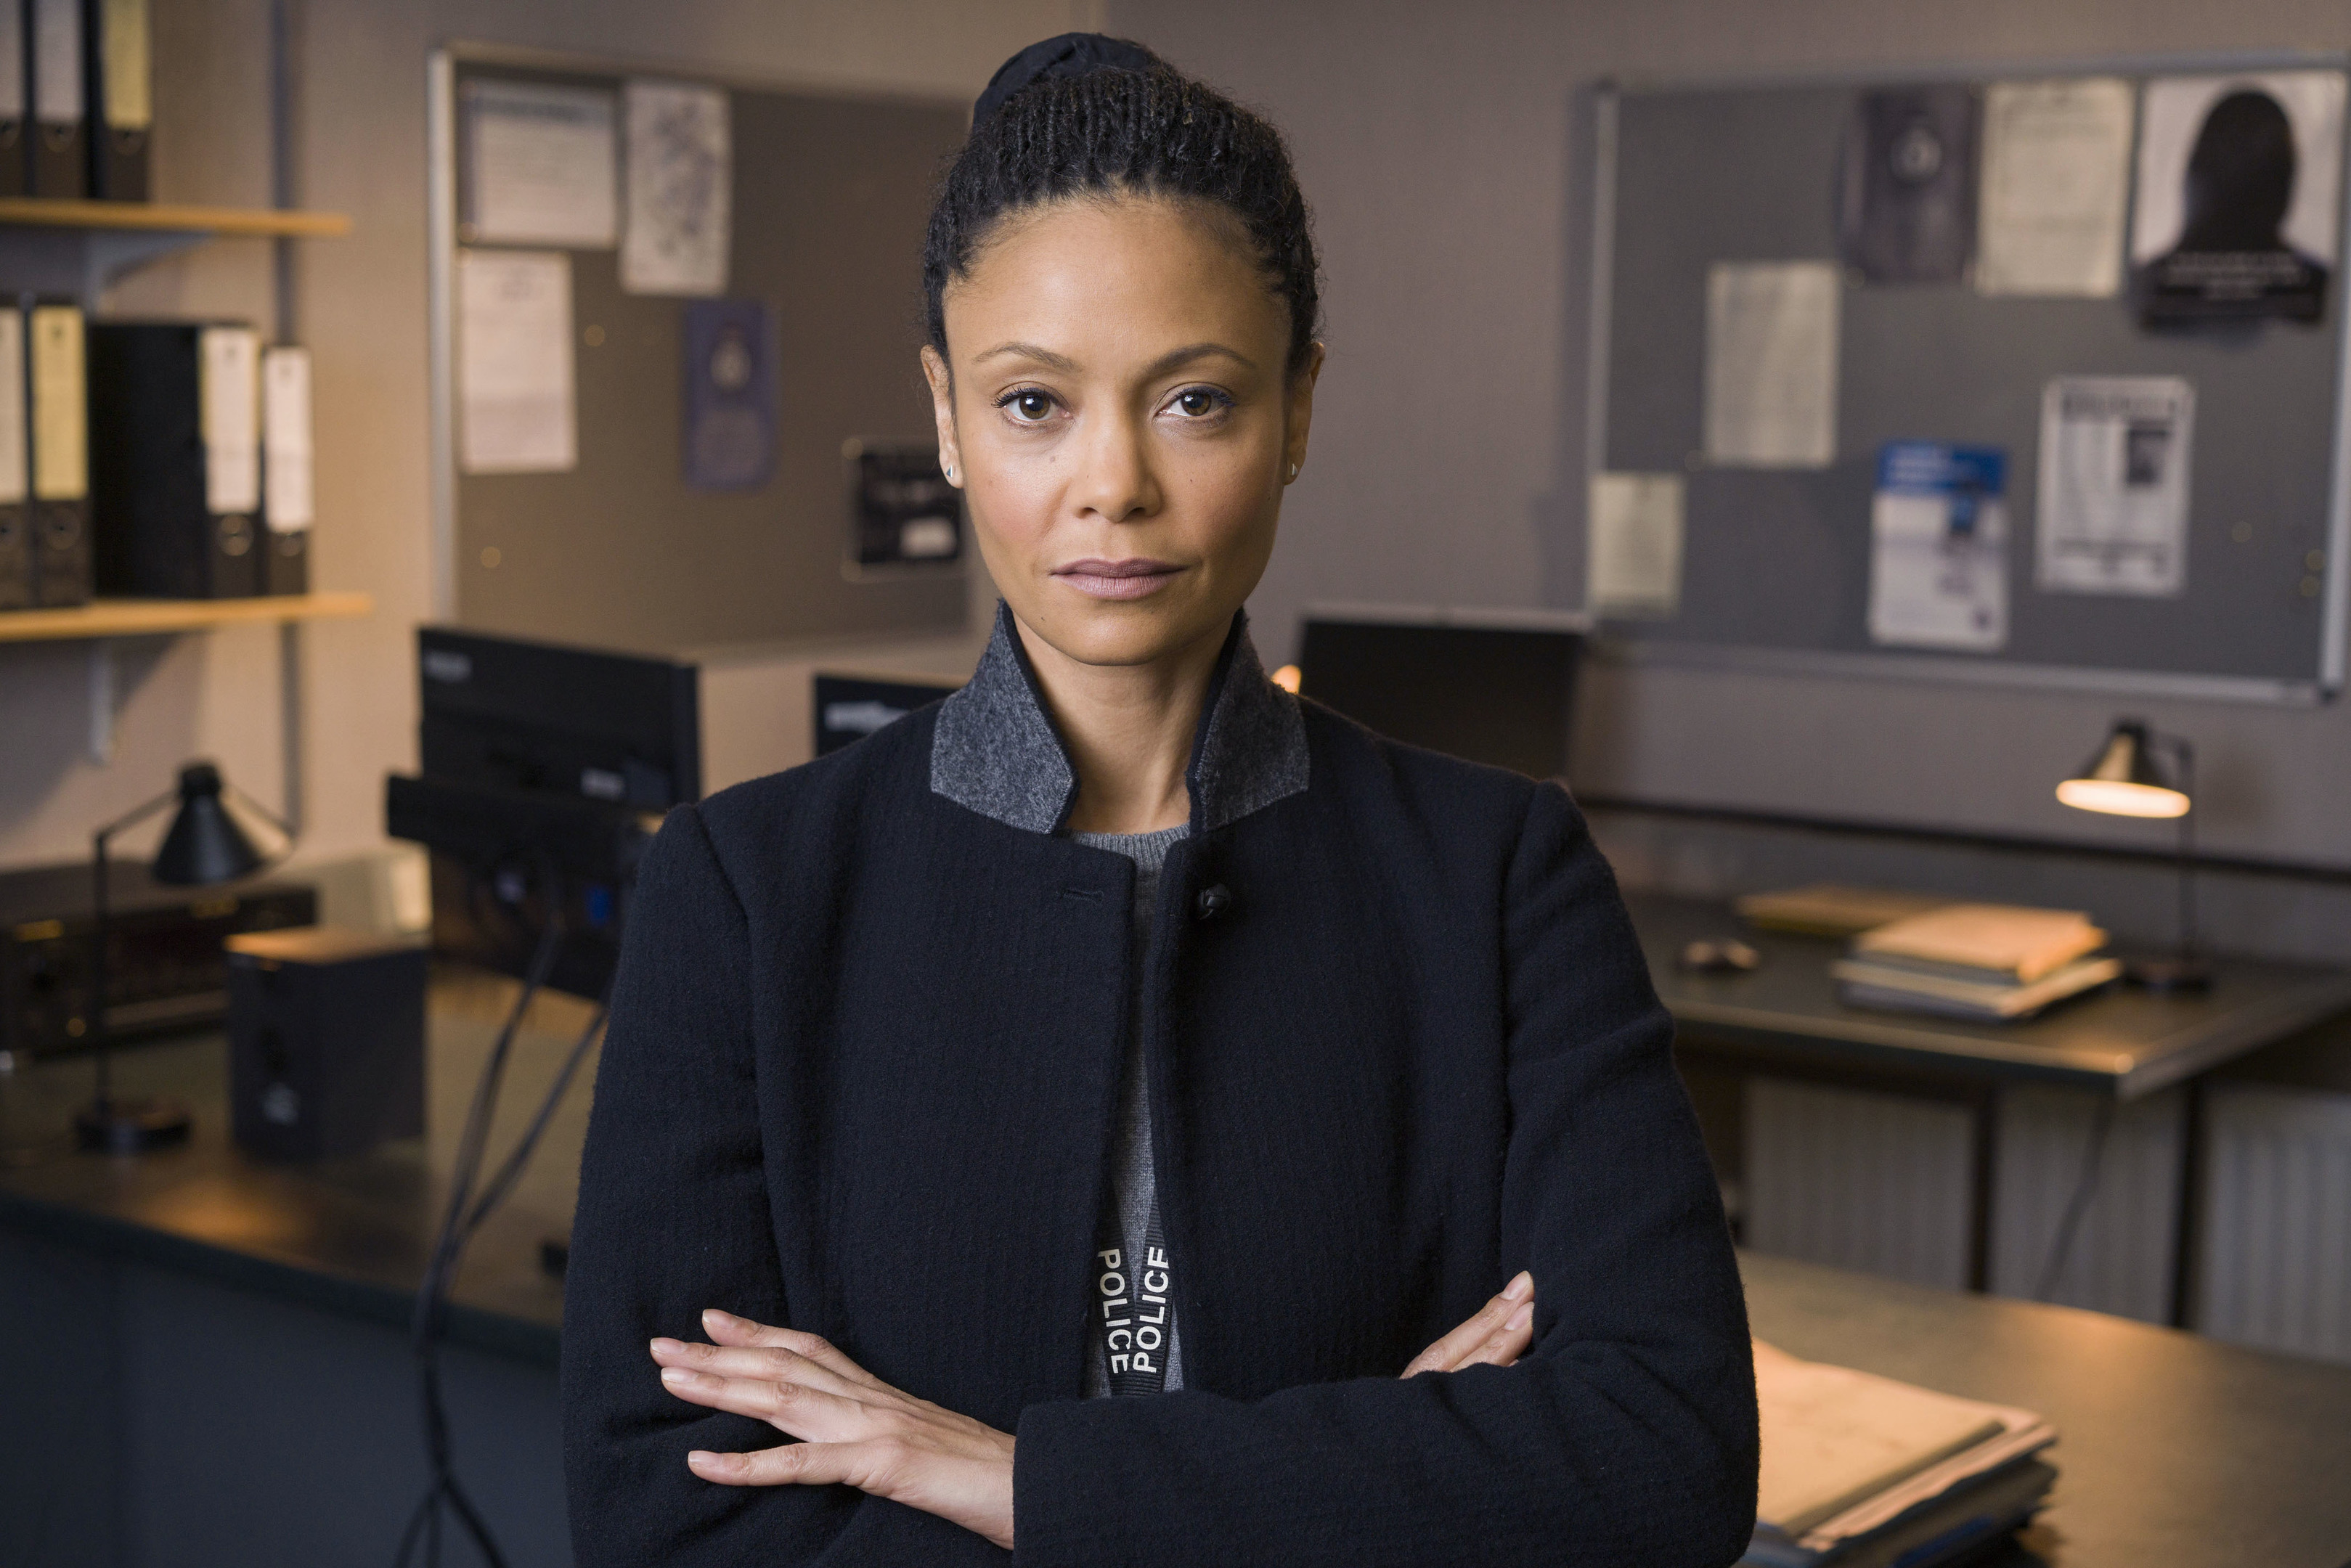 Thandie Newton as Detective Chief Inspector Roz Huntley (Des Willie / Ward Productions)